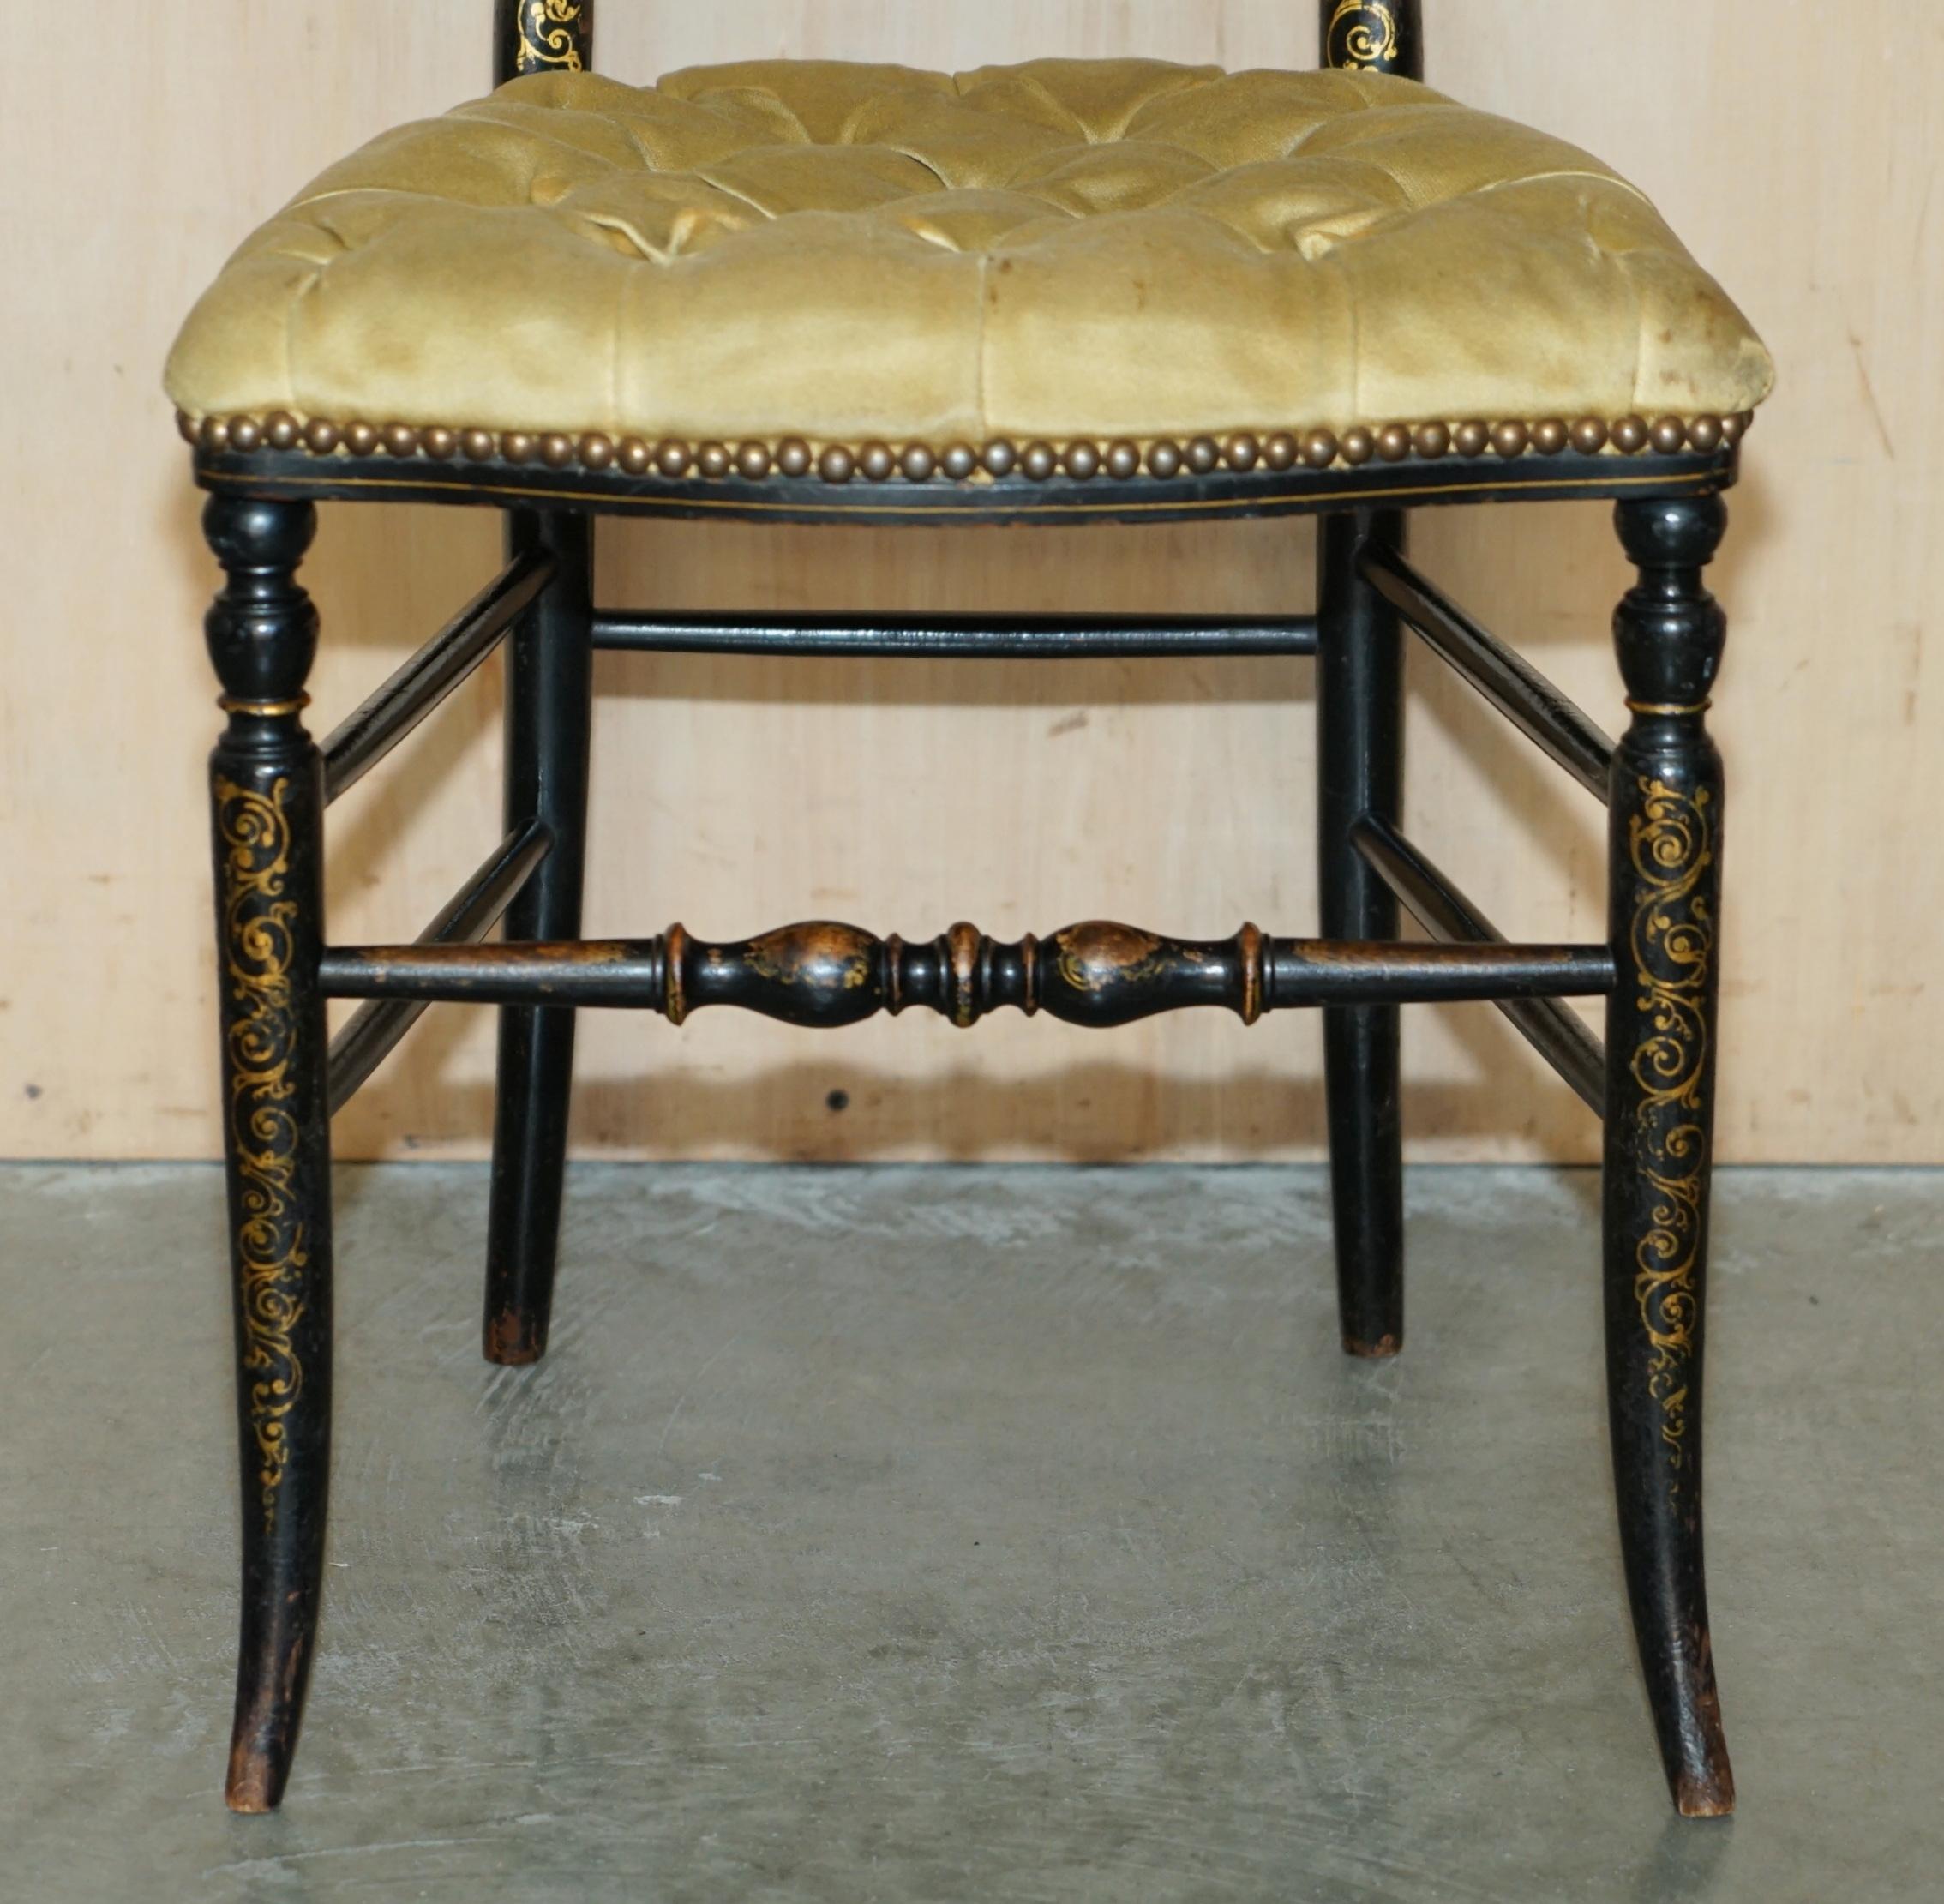 ANTIQUE REGENCY 1815 EBONiSED MOTHER OF PEARL SILK CHESTERFIELD SEAT SIDE CHAIR For Sale 2